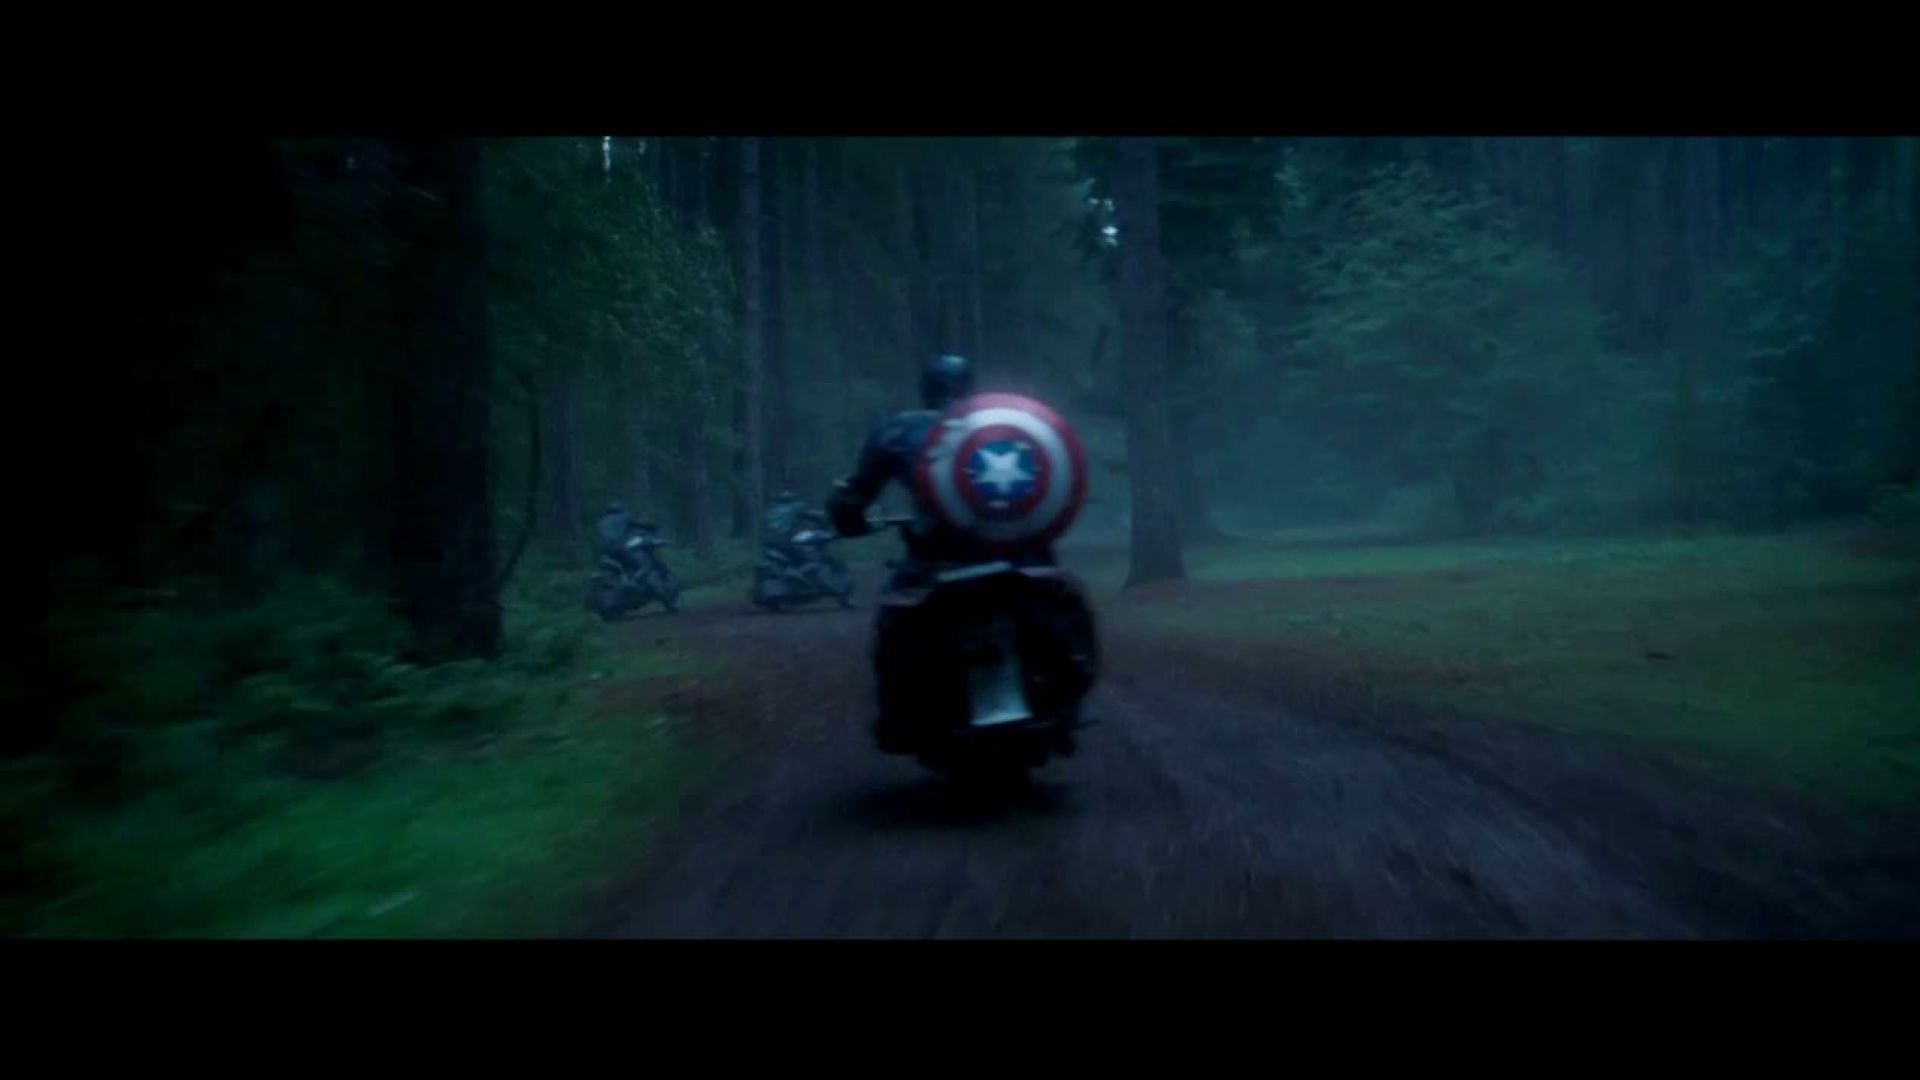 Captain America uses fire to defeat chasing motorcycles